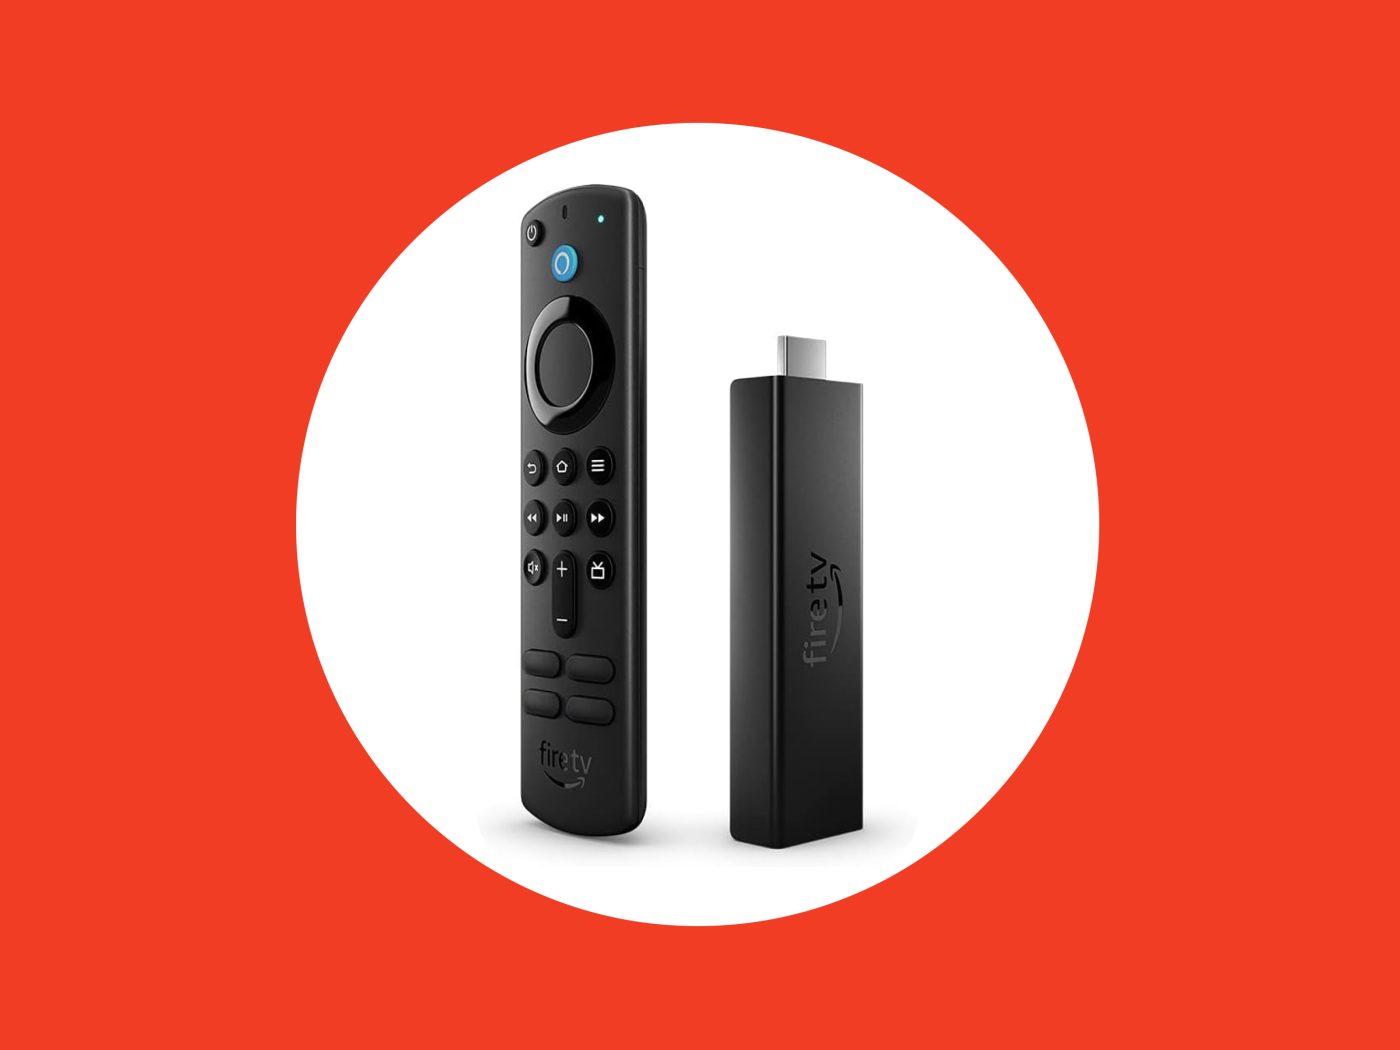 Fire TV Stick 4K Max hits new all-time low price of $39.99 — Regular 4K  Firestick down to $24.99